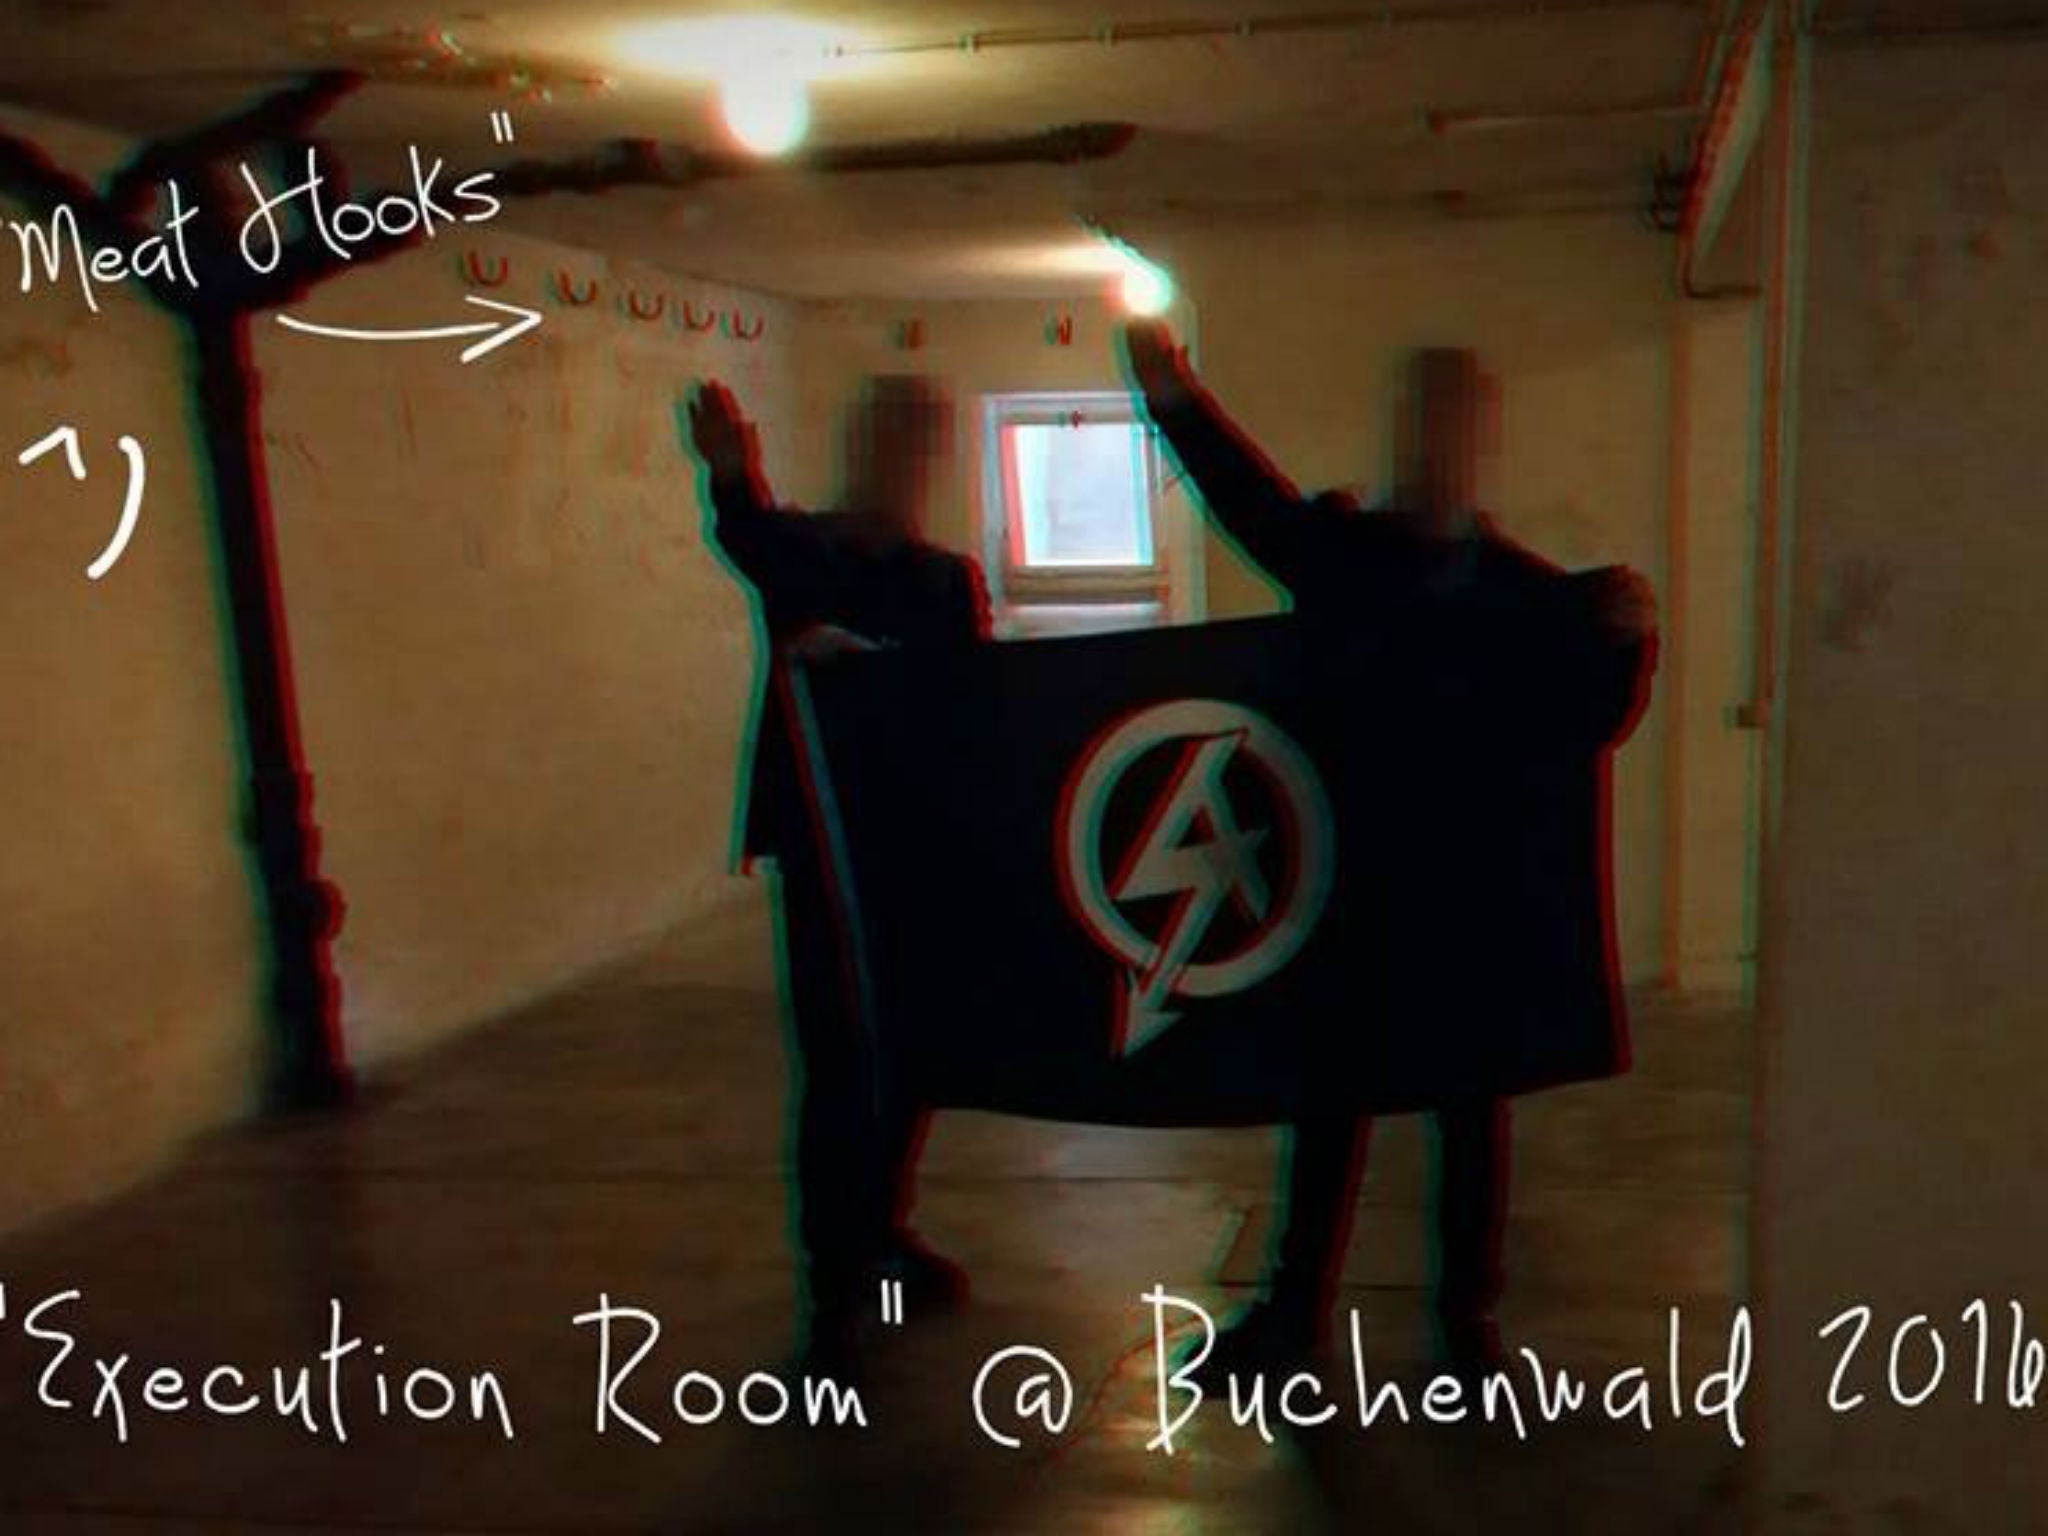 A photo shared online of Alex Davies and Mark Jones performing a Nazi salute inside Buchenwald concentration camp in April 2016